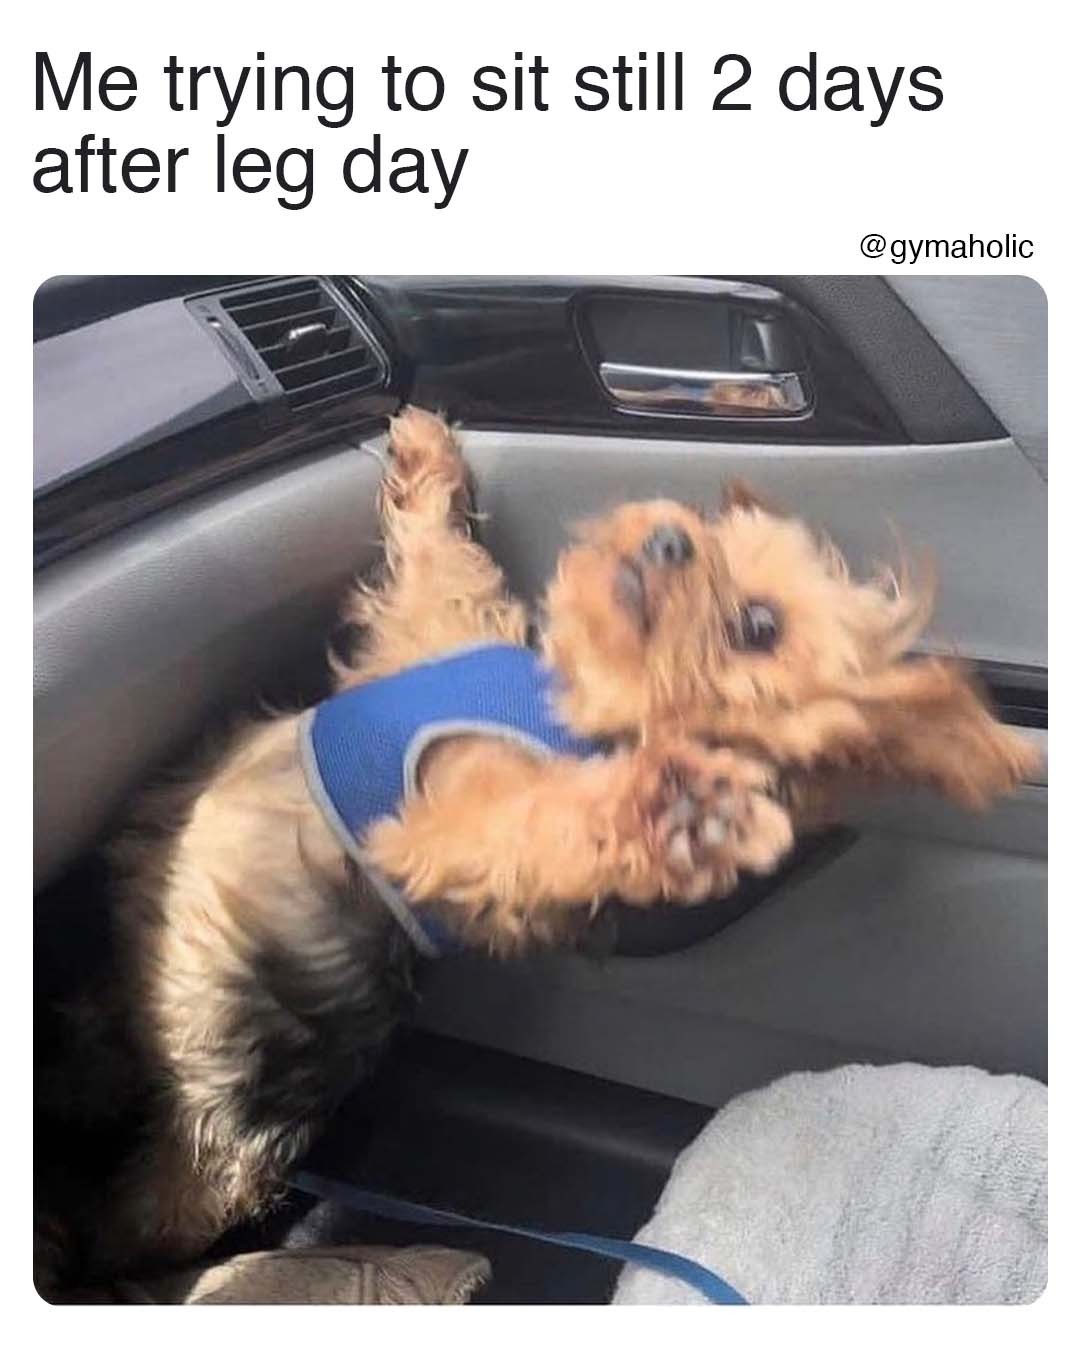 Me trying to sit still 2 days after leg day